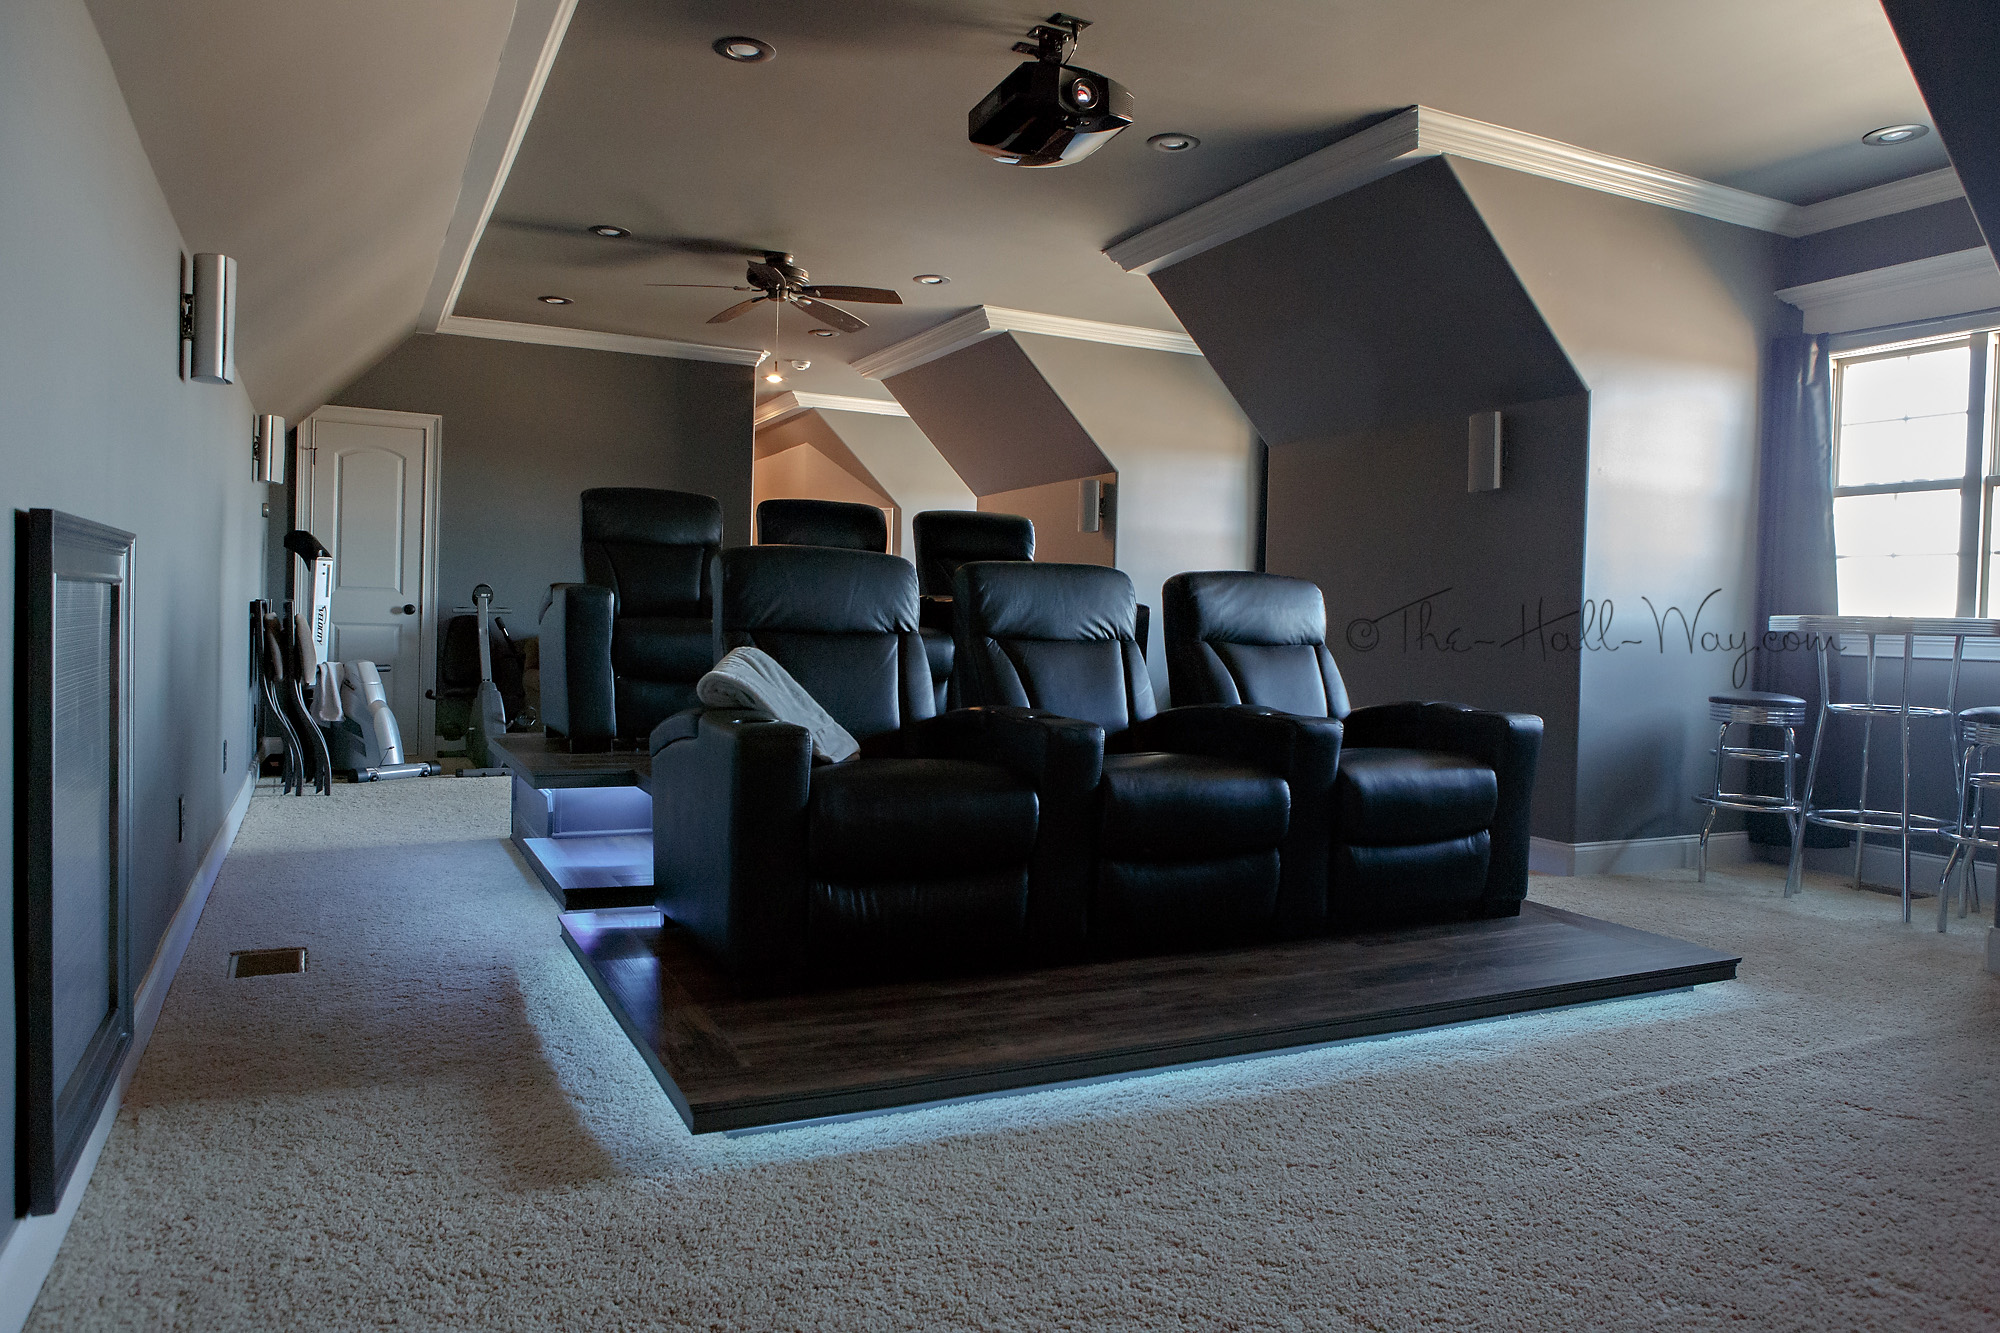 Home Theater – Final Reveal | Life…The Hall Way